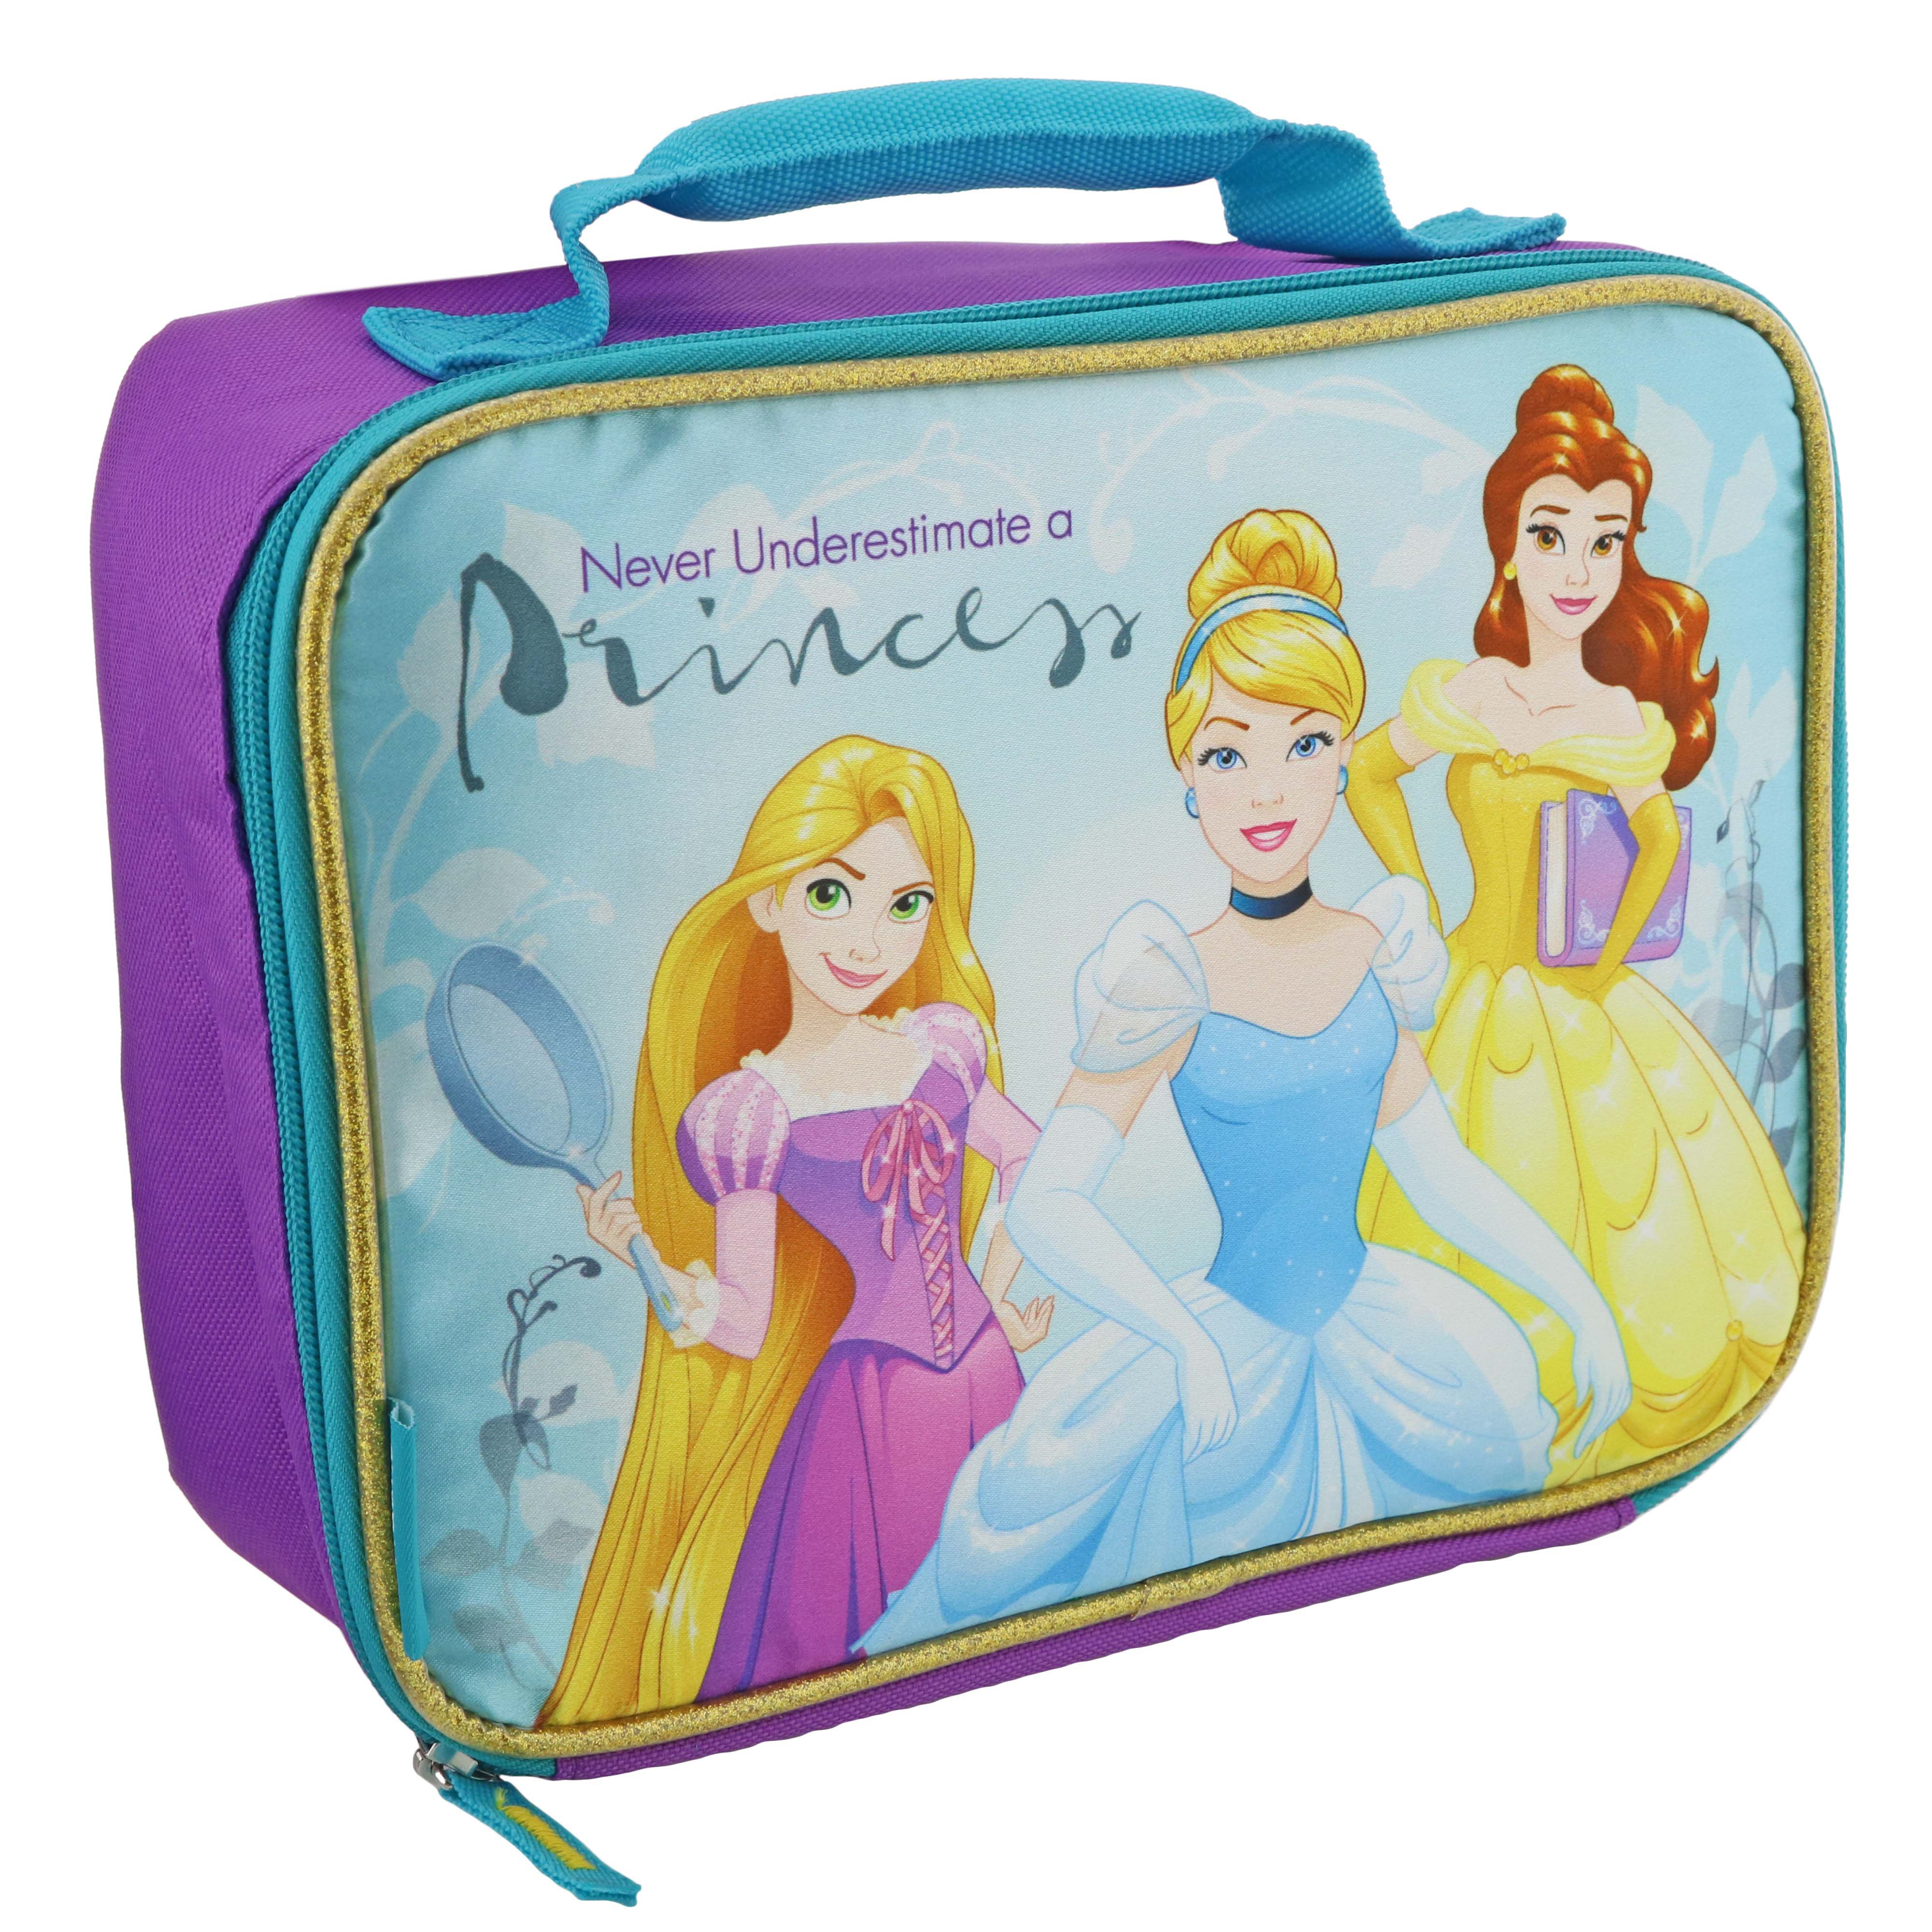 New Disney Princess Lunch Box Carry Bag School Supplies Insulated